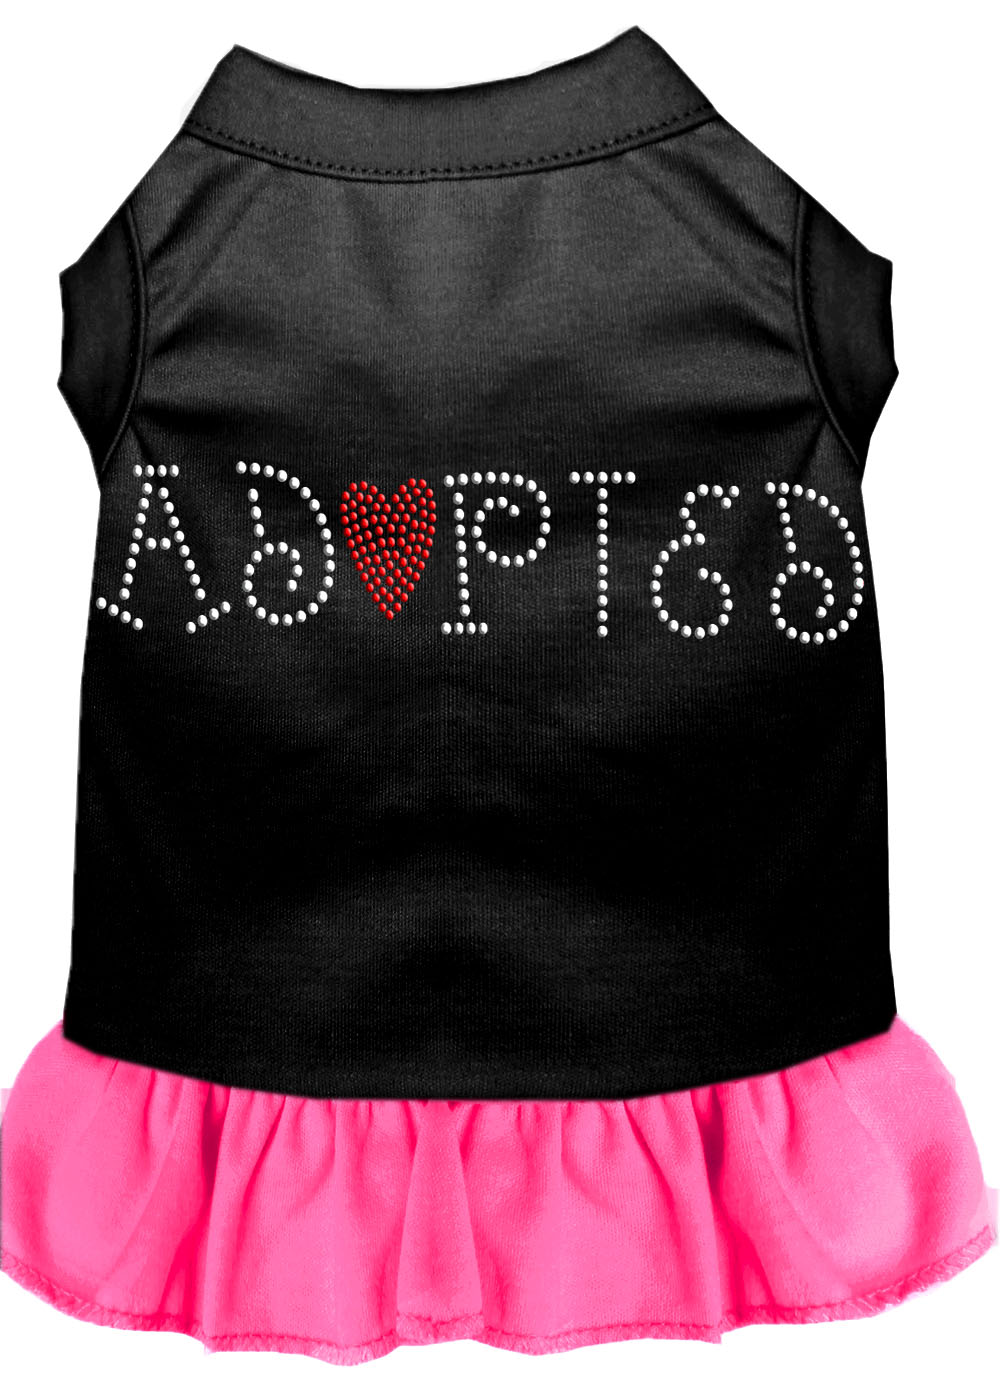 Adopted Rhinestone Dress Black with Bright Pink Sm